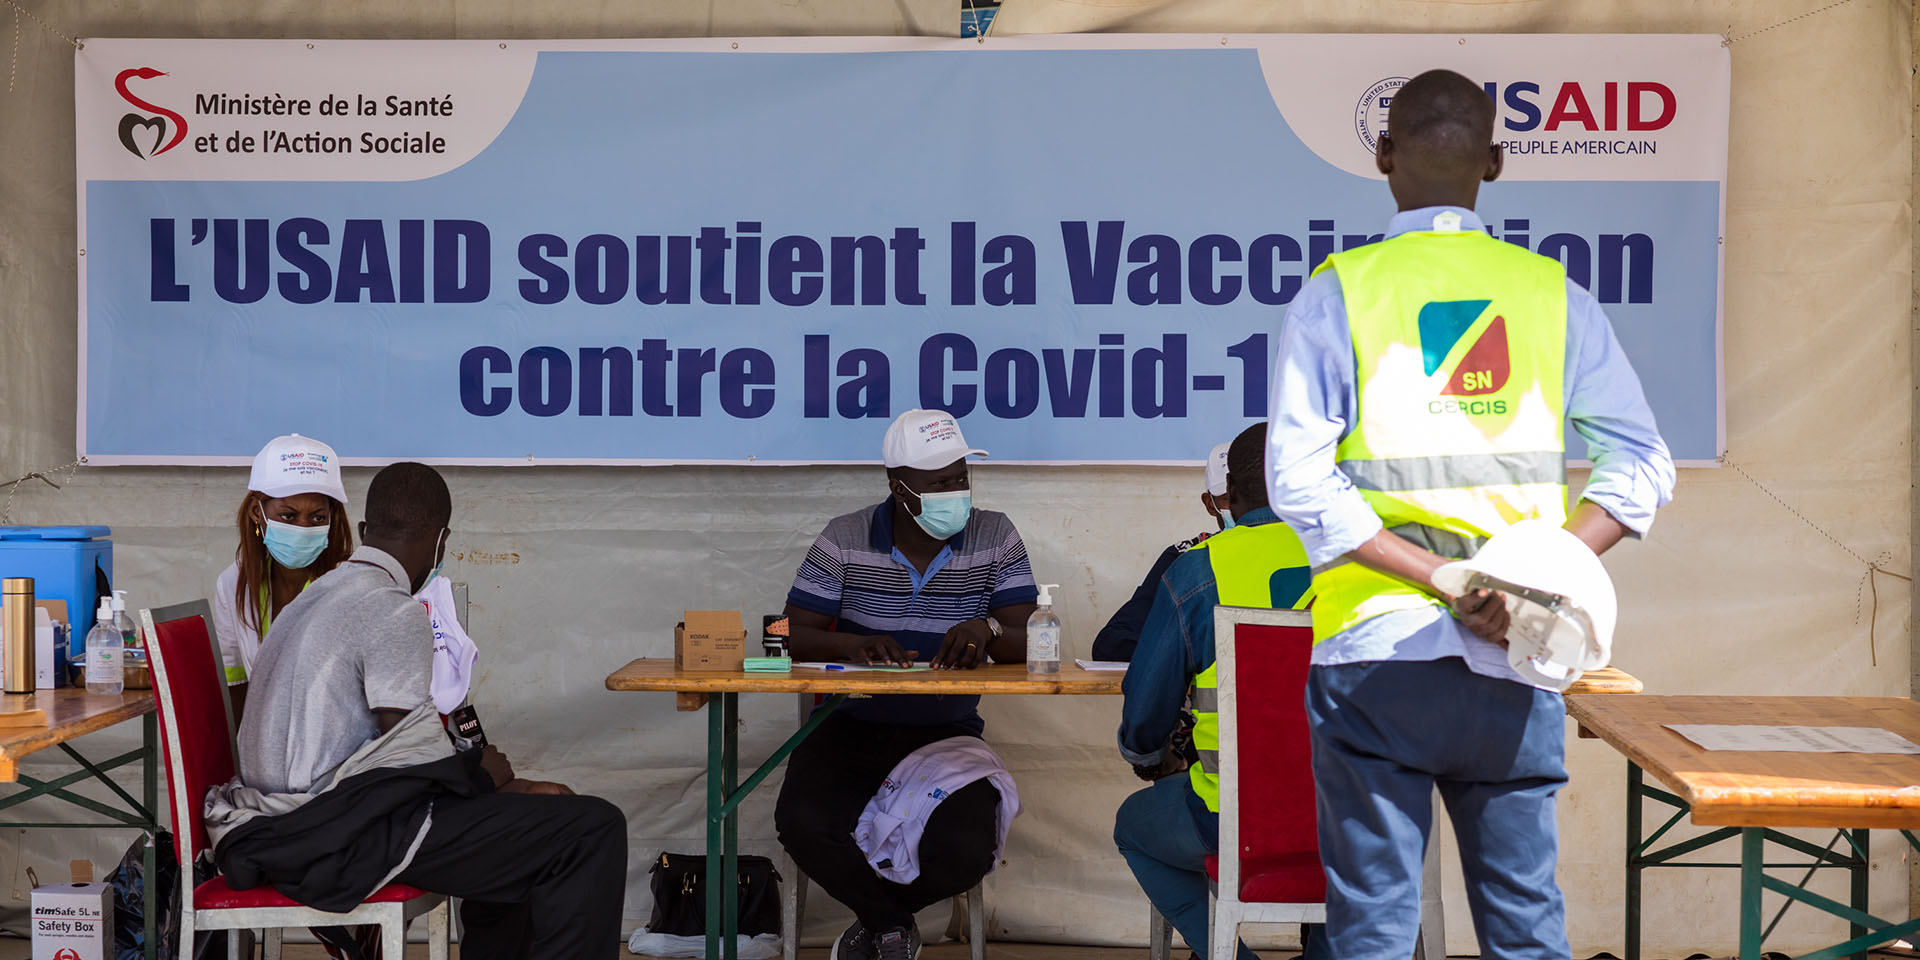 People waiting for their vaccines during the November 4-5 2021 mass vaccination campaign